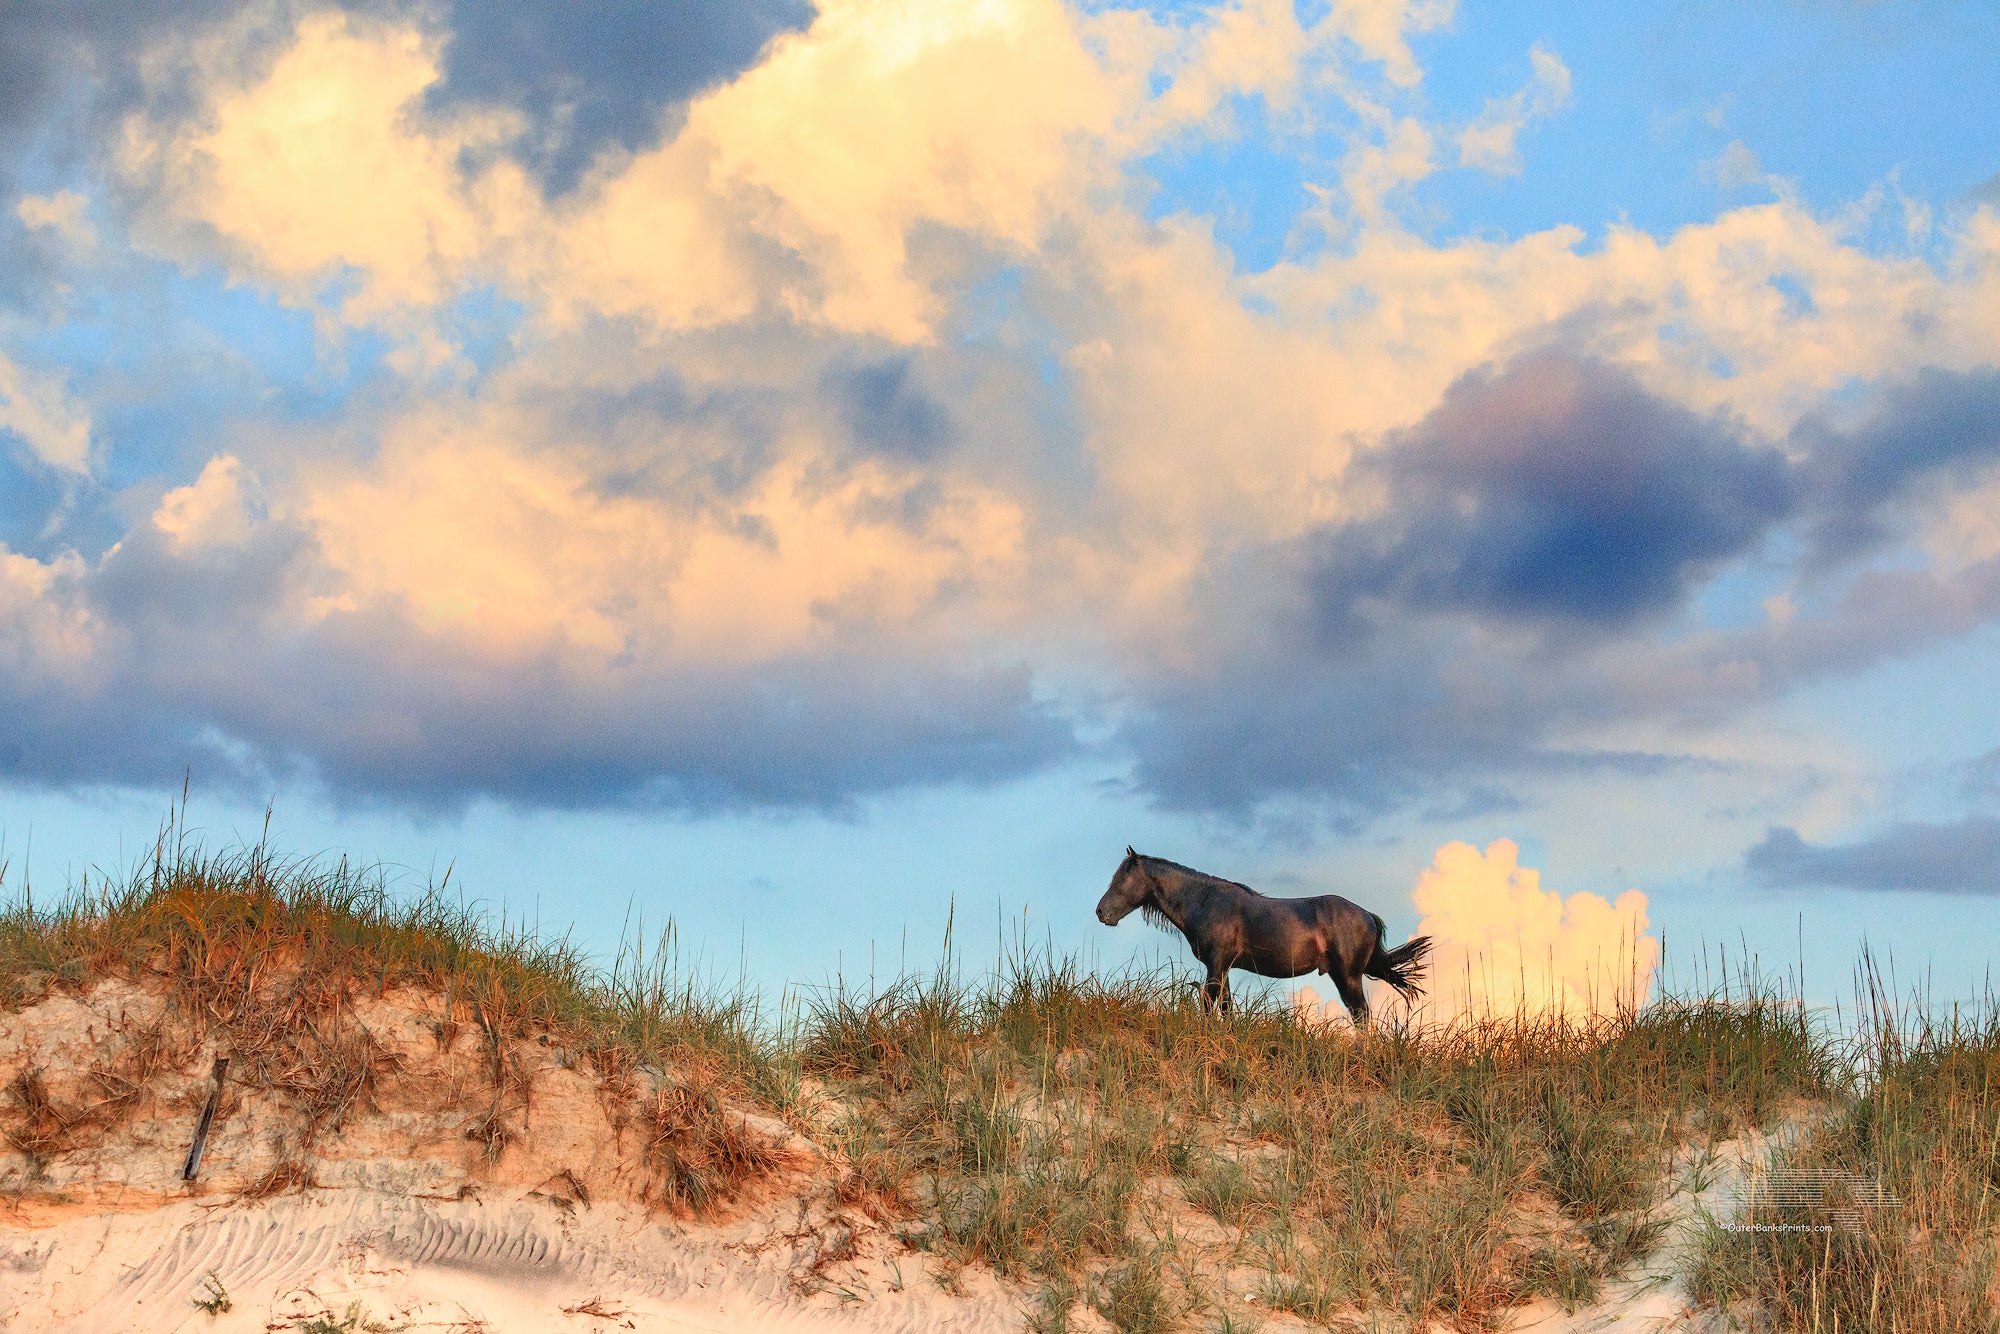 Stallion, dunes, and clouds at sunrise in Corolla on the Outer Banks of North Carolina.